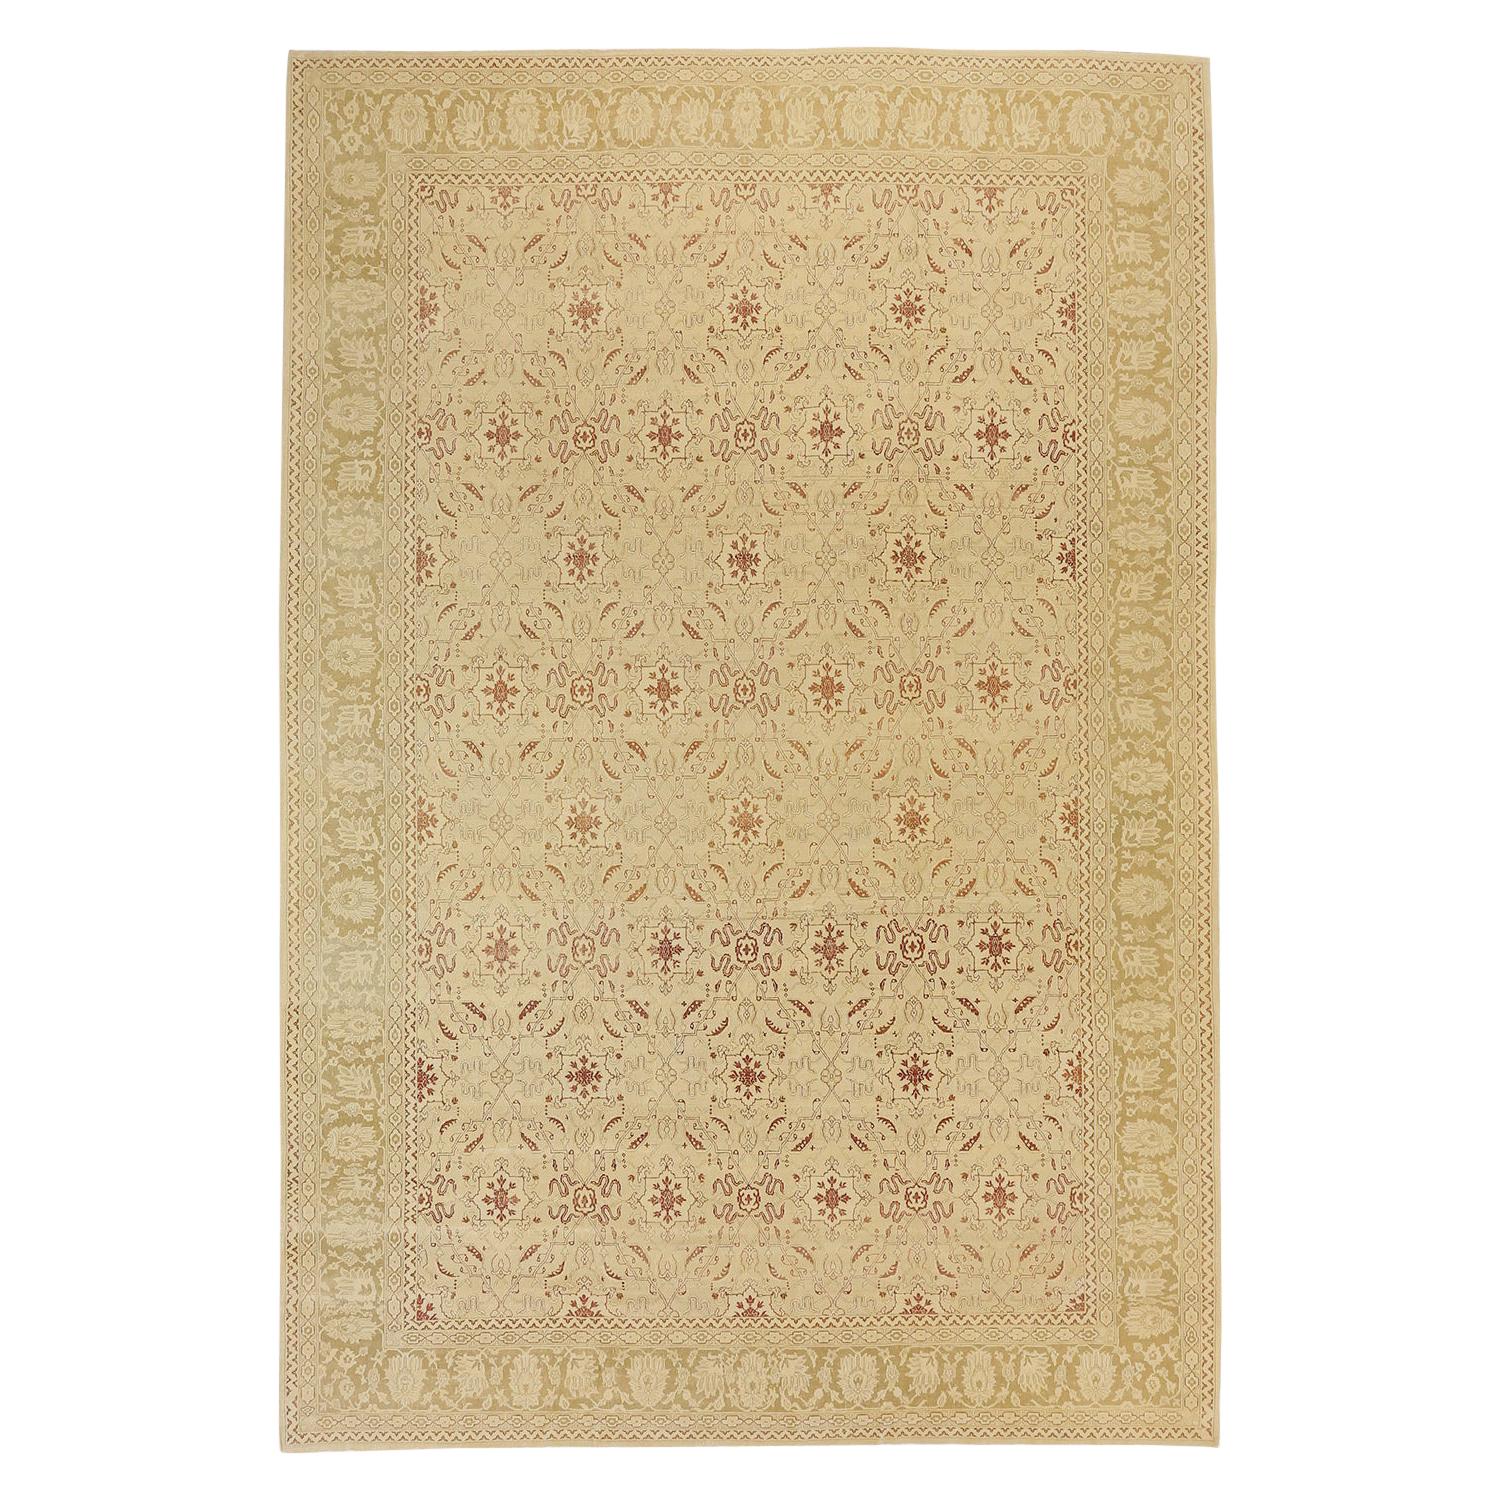 Antique Turkish Agra Rug with Beige and Red Botanical Field For Sale